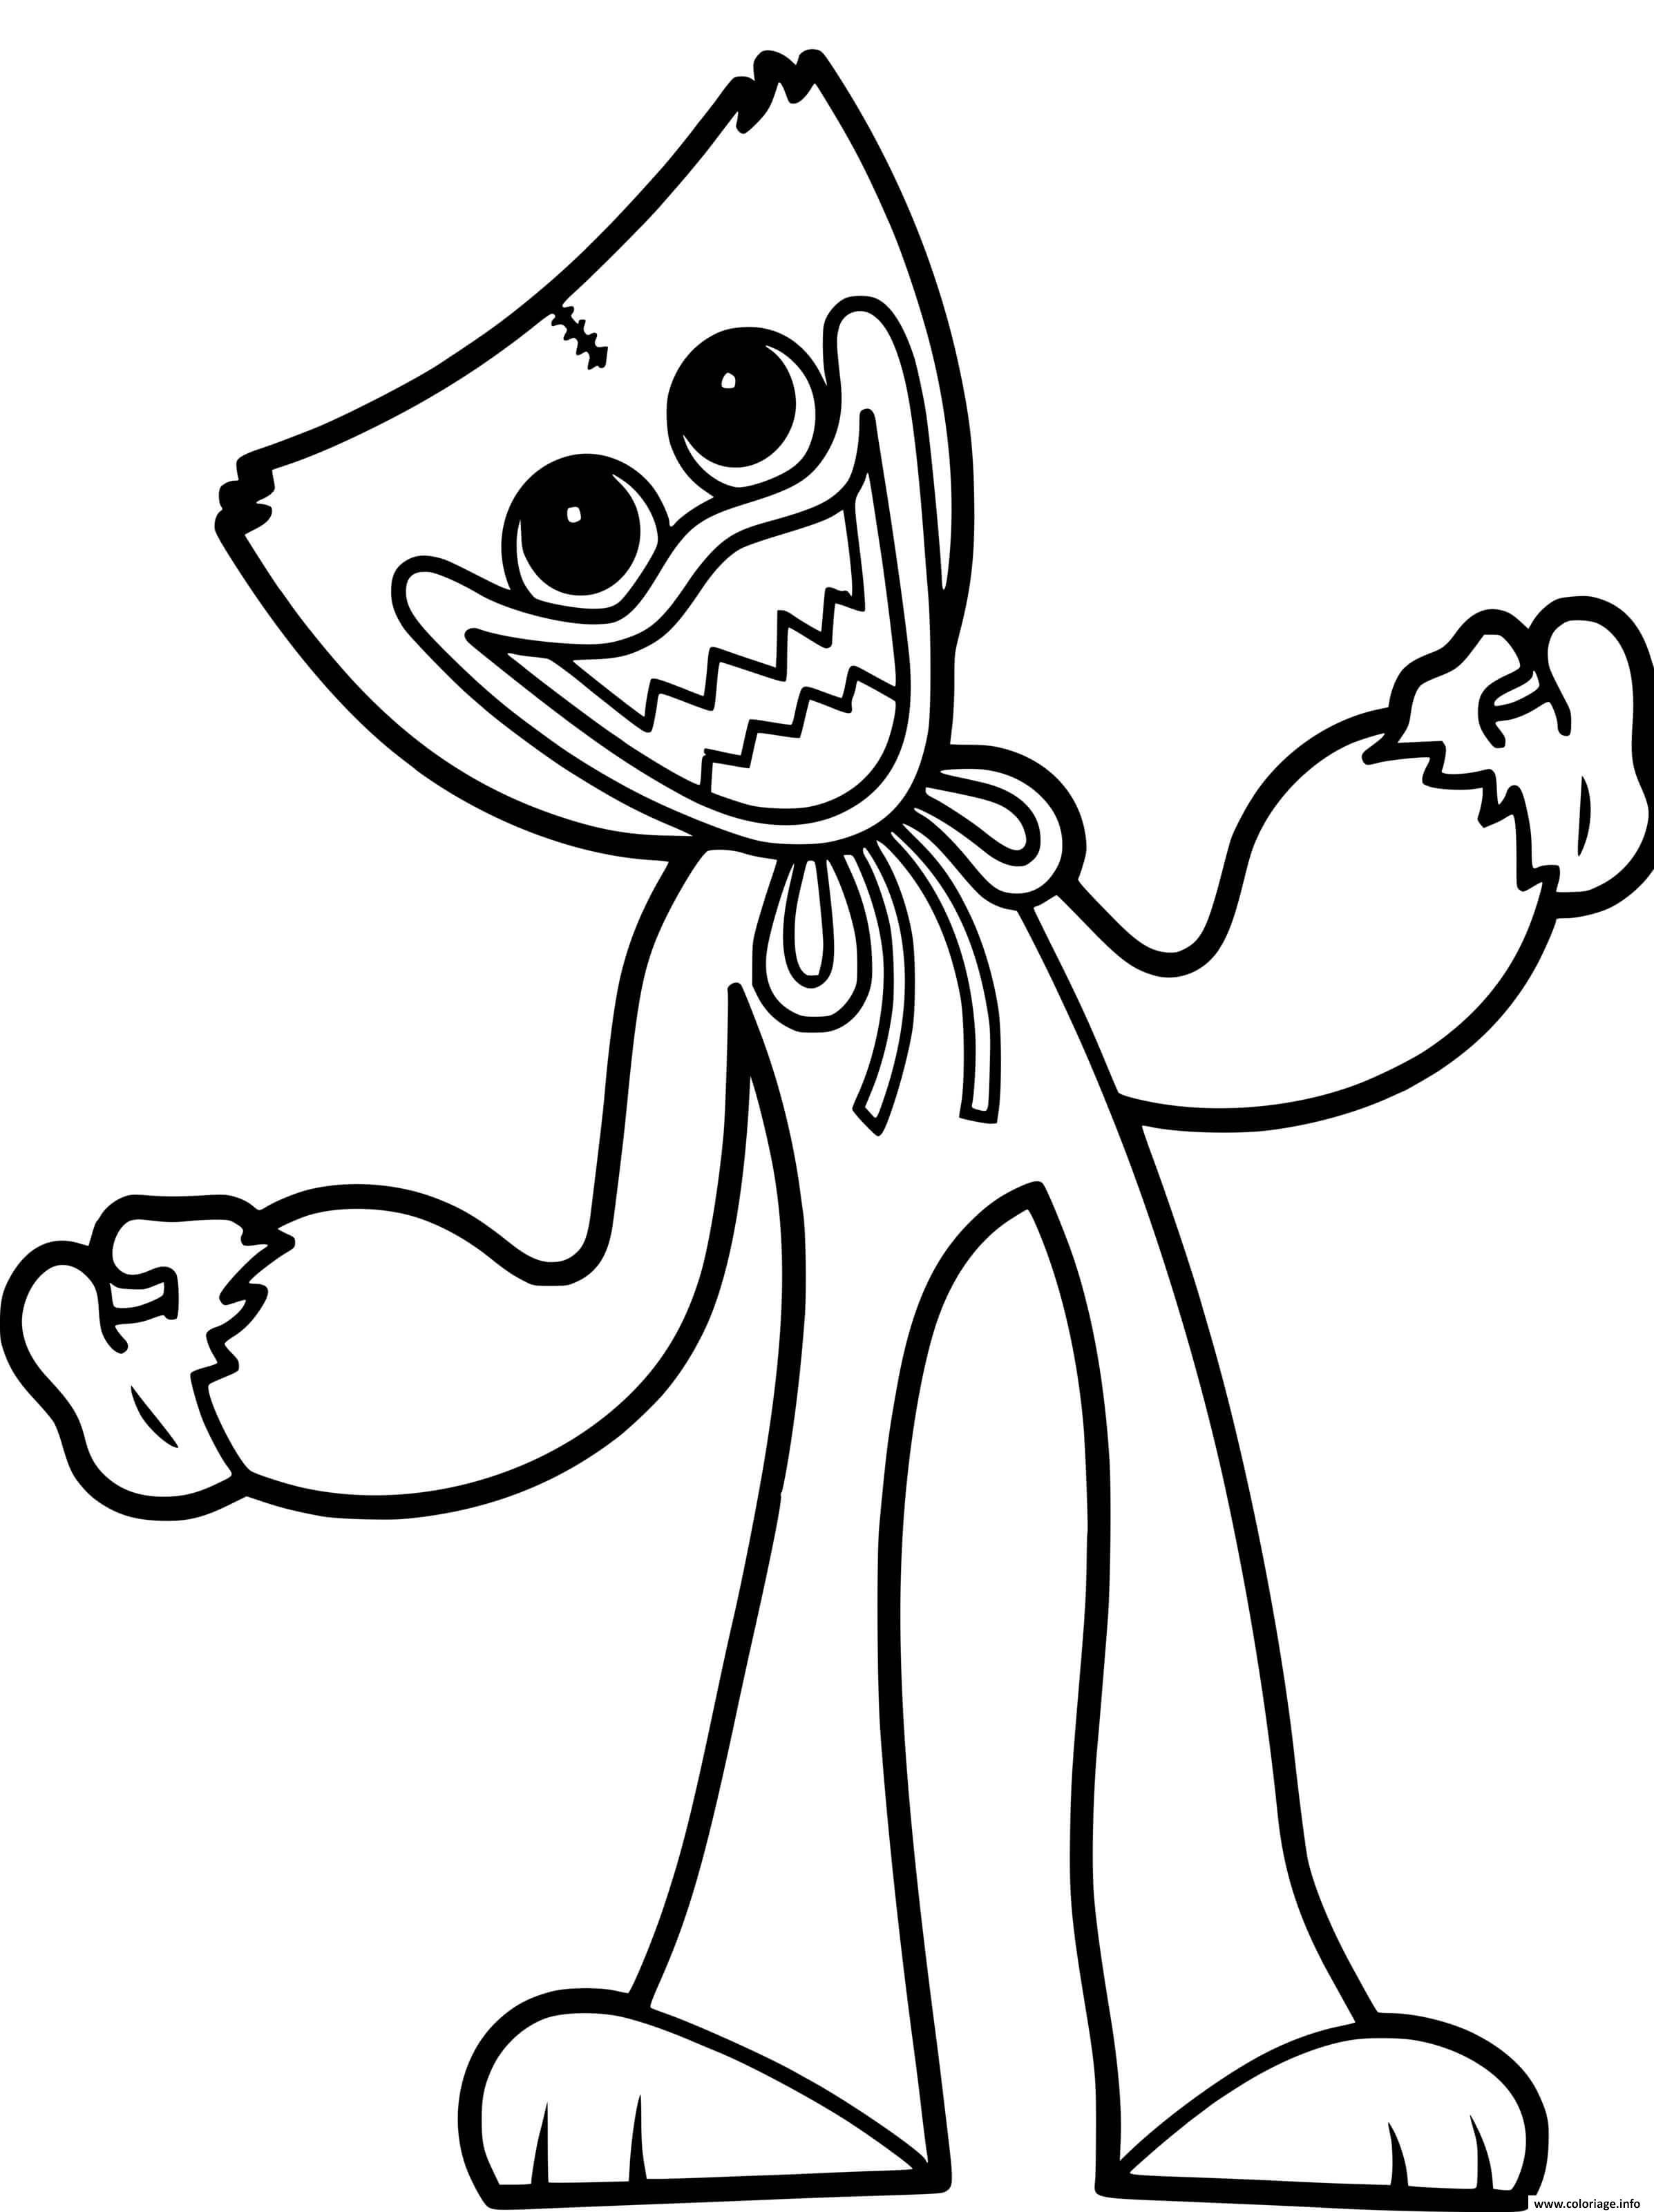 Coloriage Huggy Wuggy Dancing Dessin Huggy Wuggy à imprimer